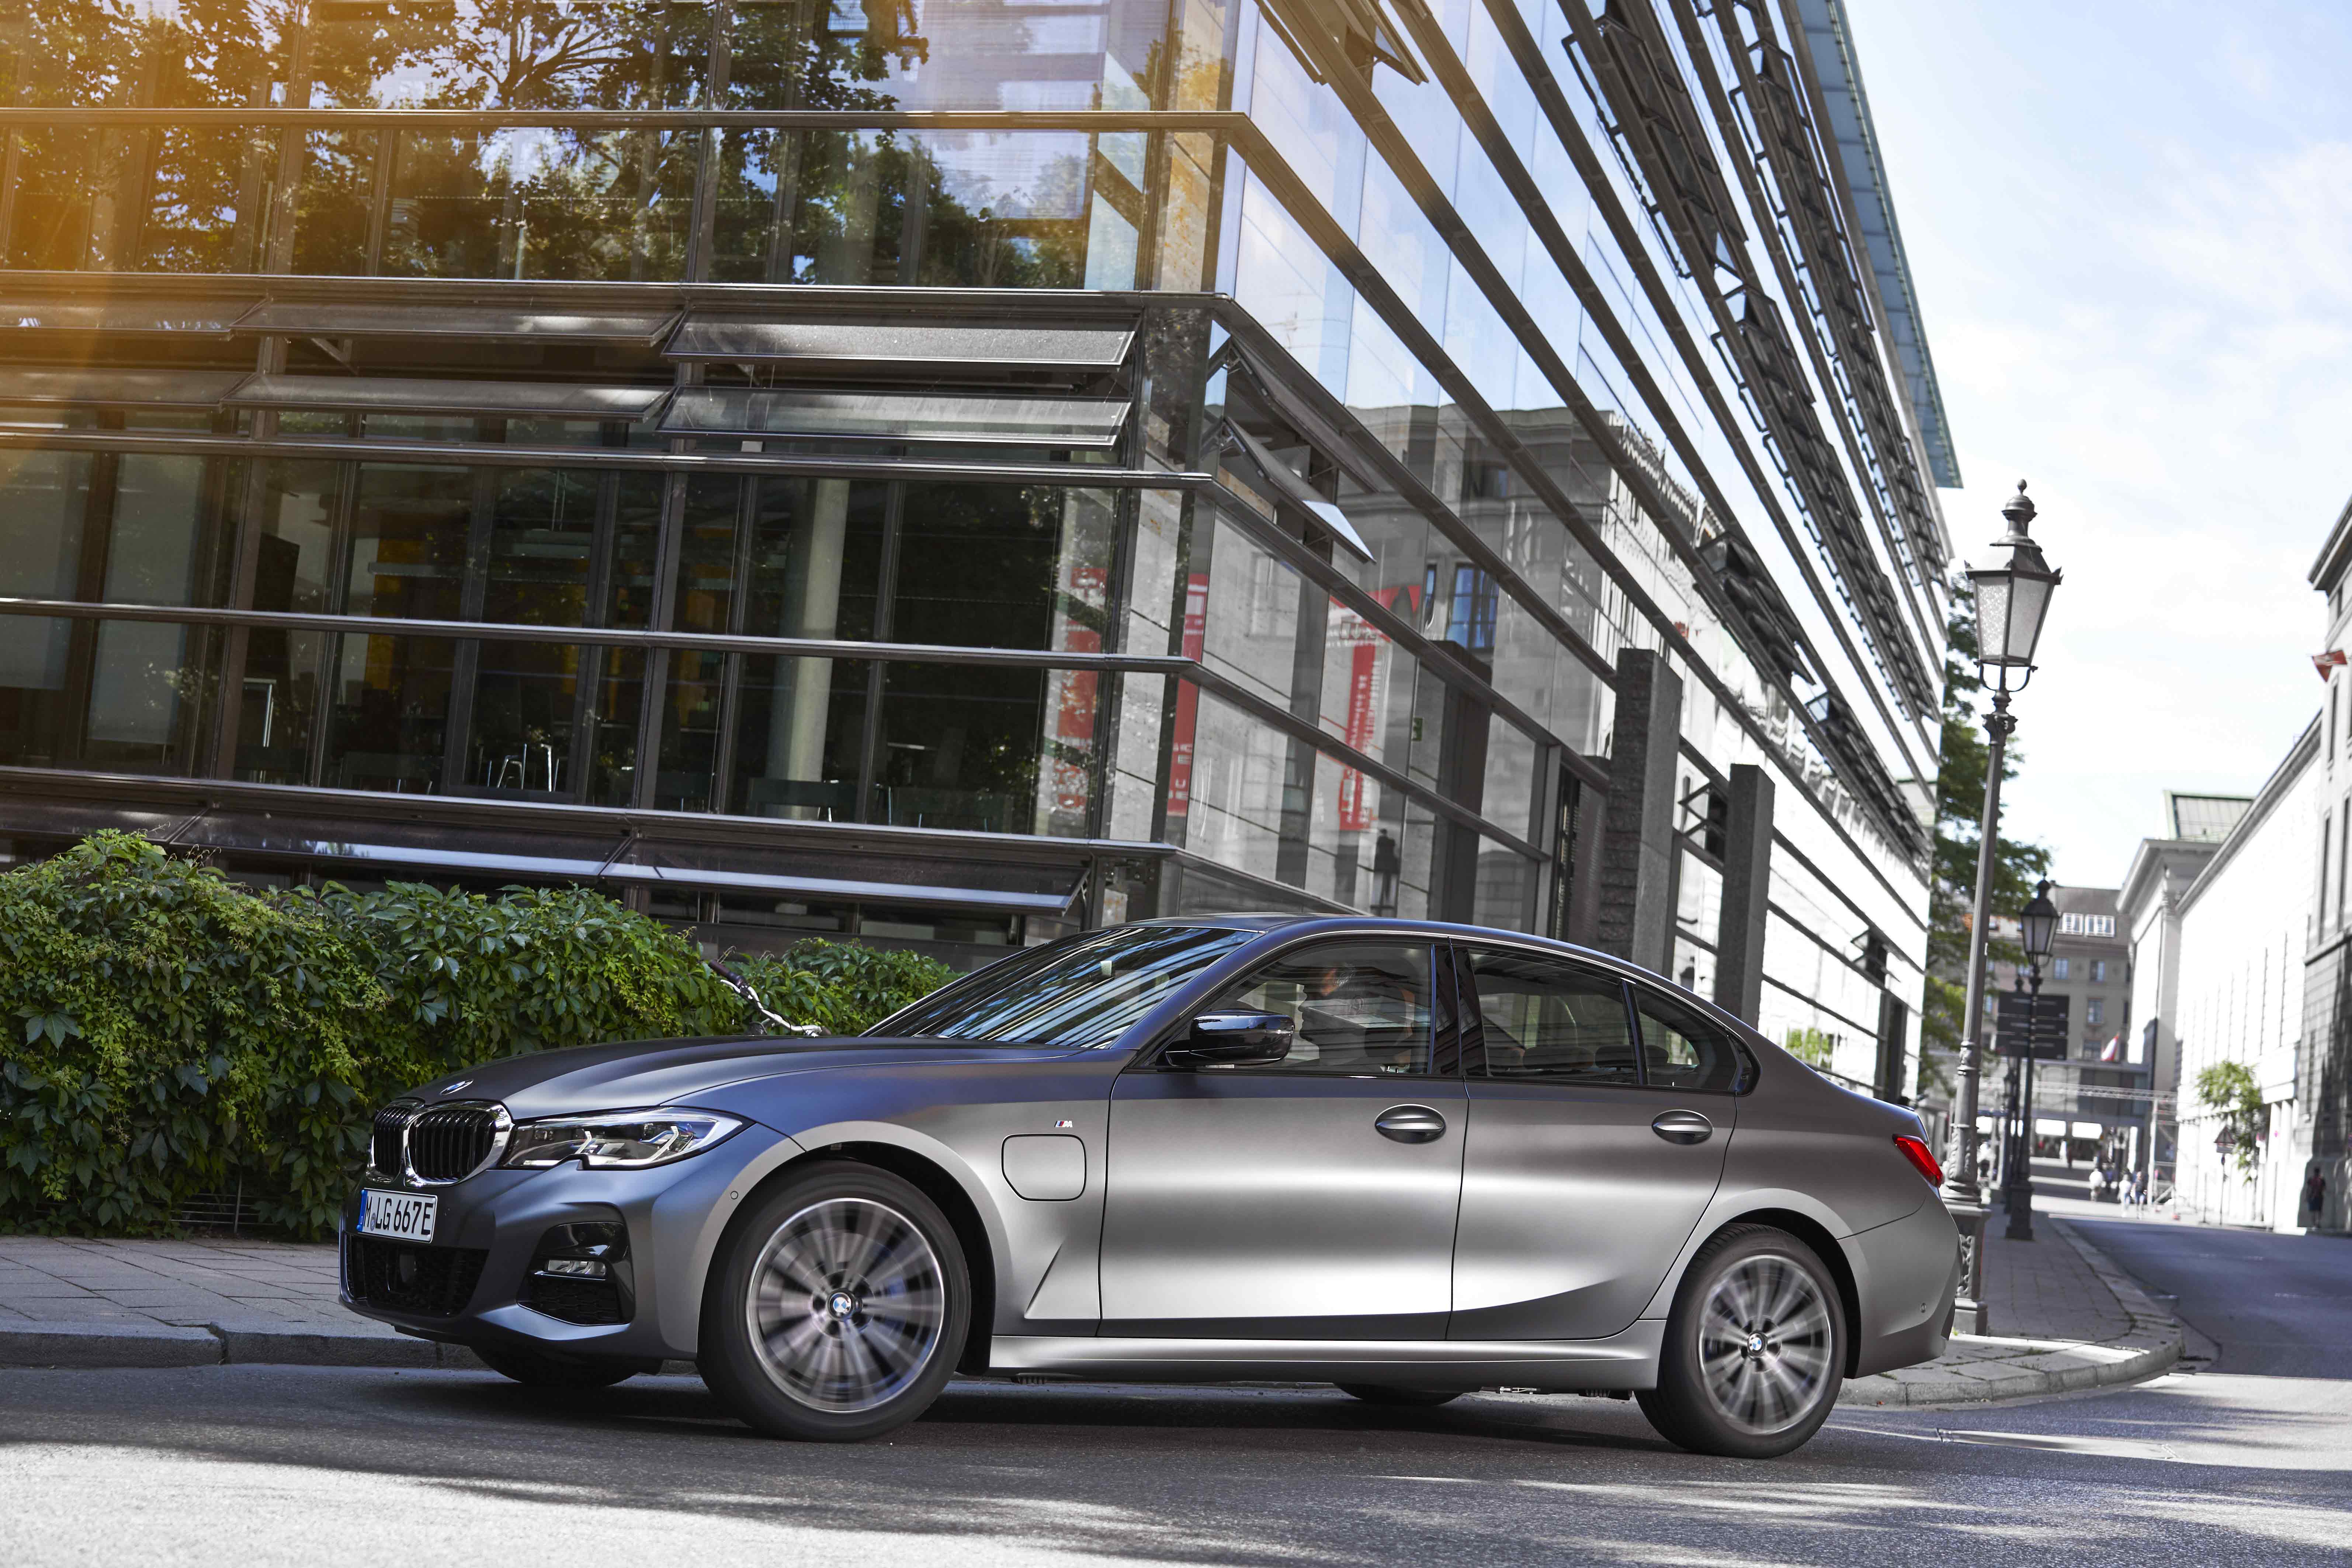 New entry-level models with plug-in hybrid drive for the BMW 3 Series and BMW 5 Series